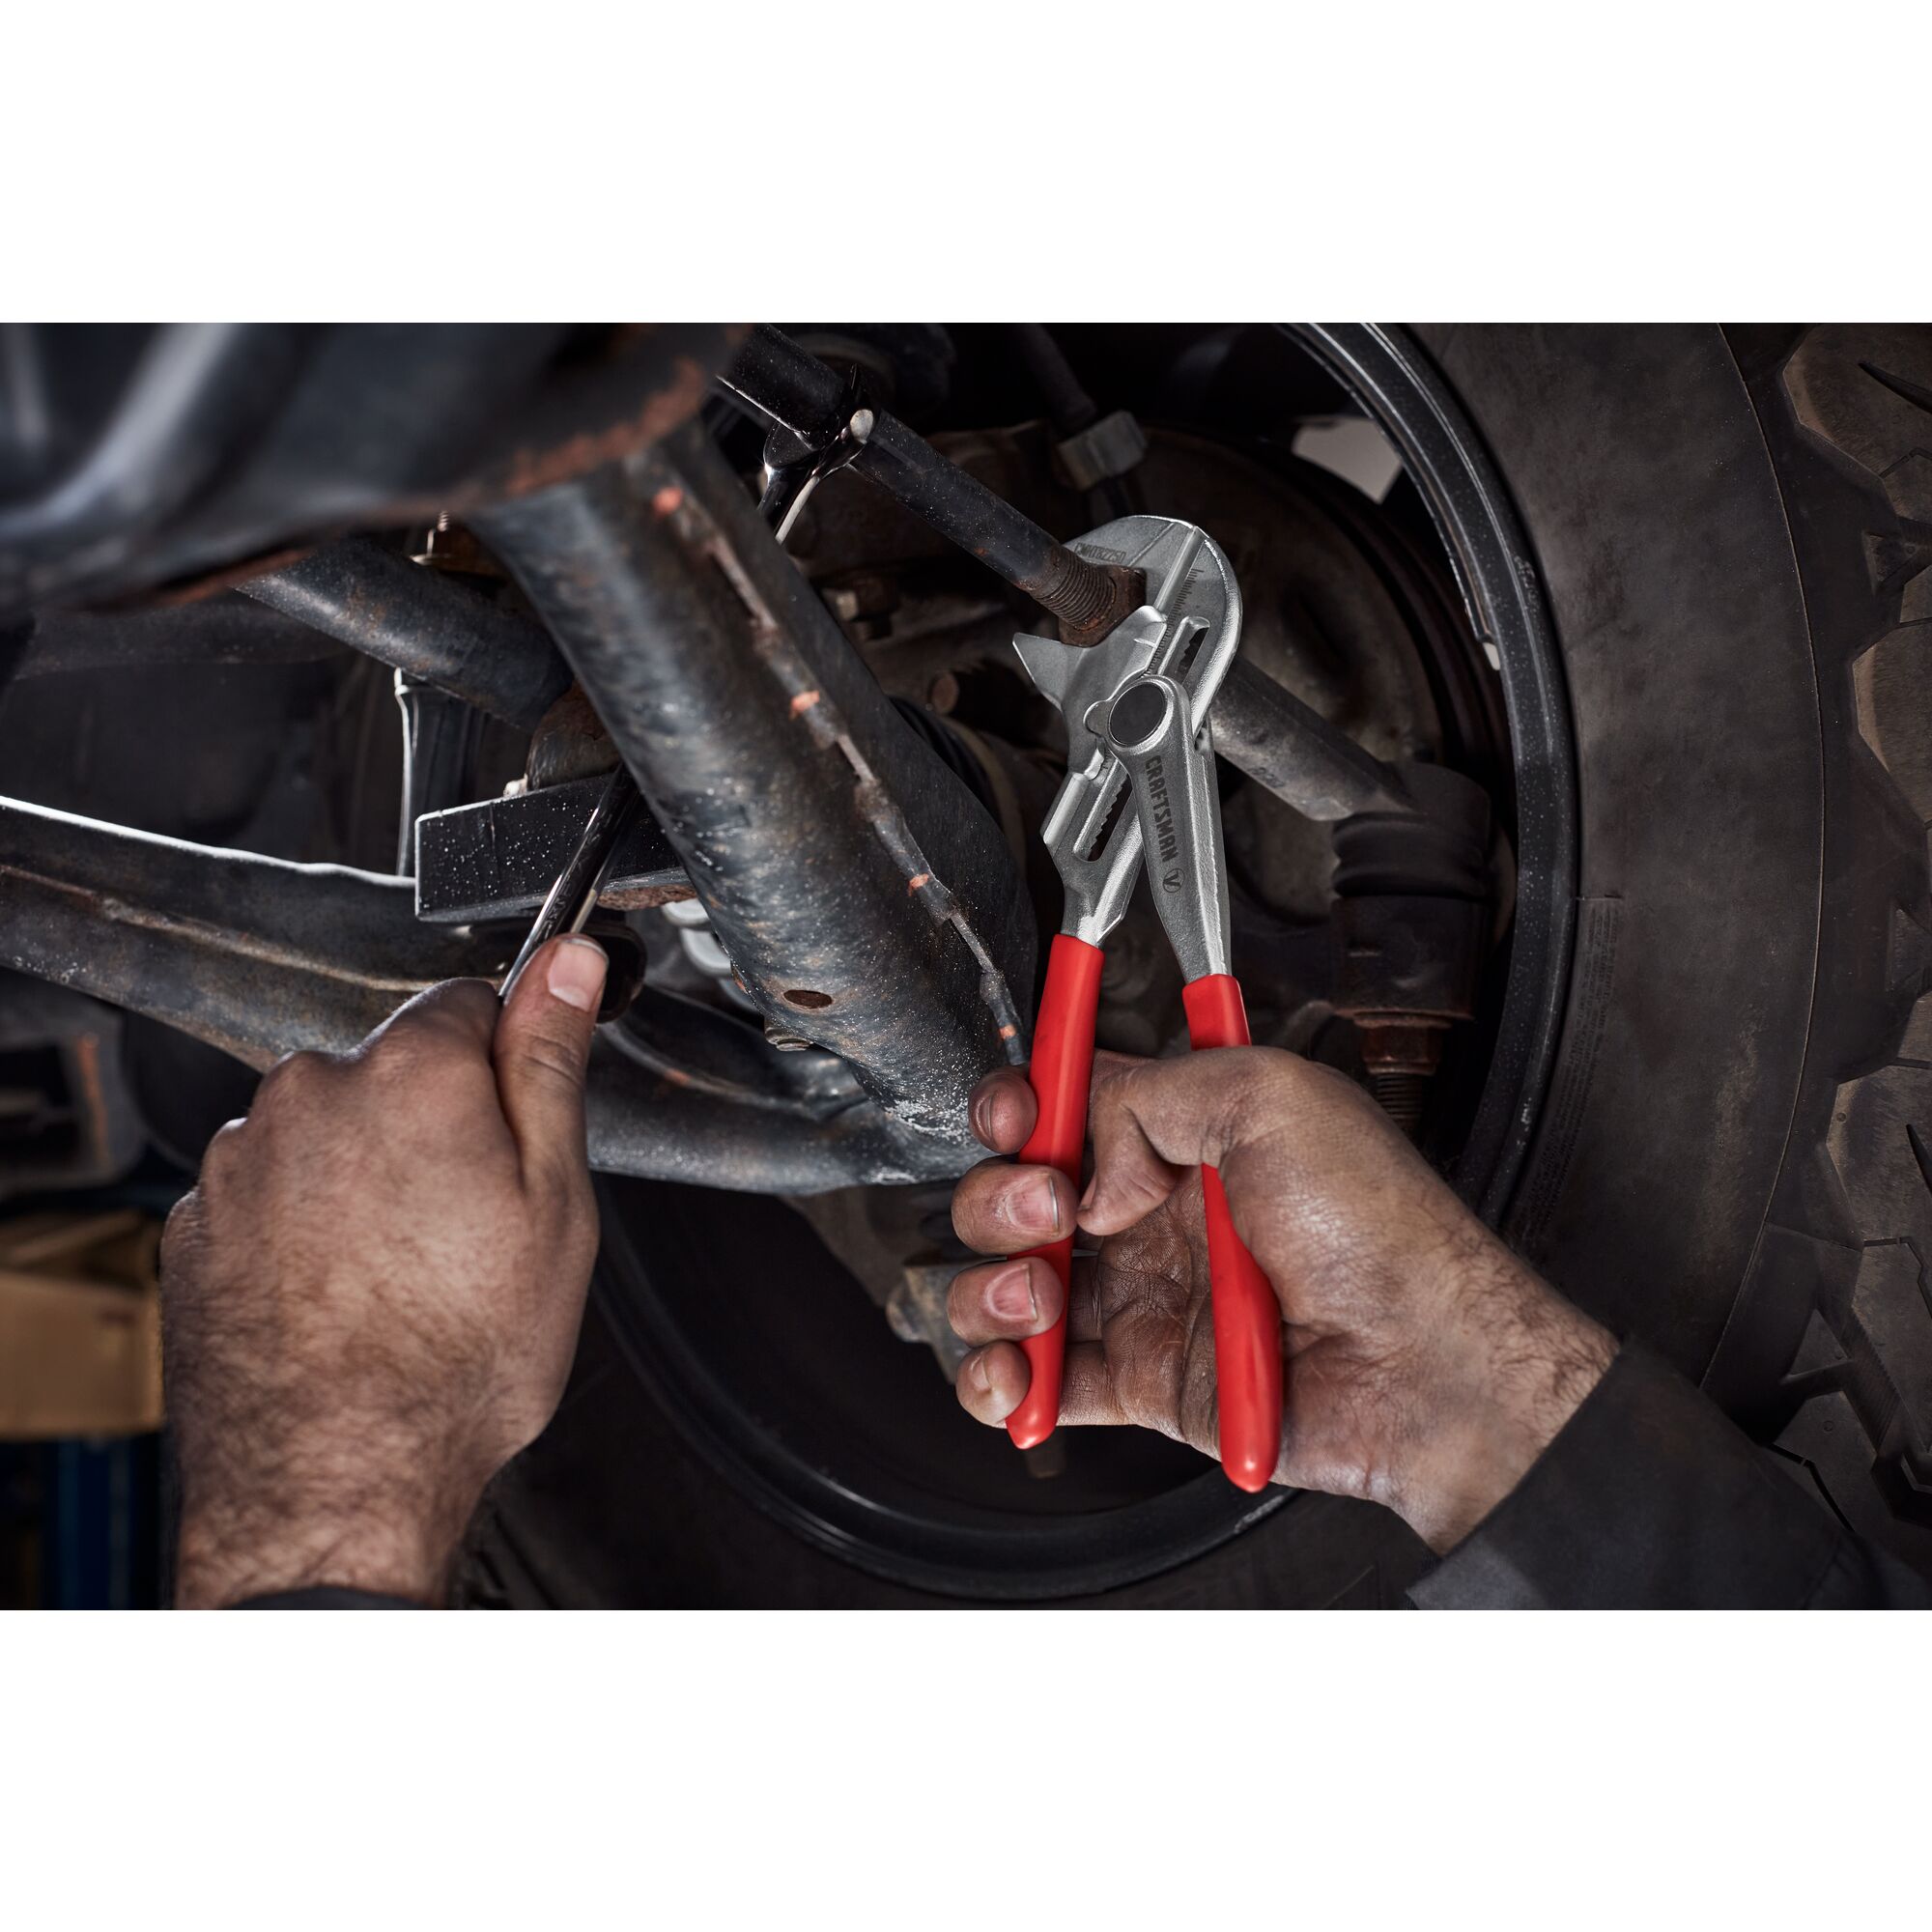 CRAFTSMAN V-Series™ pliers wrench tightening bolt